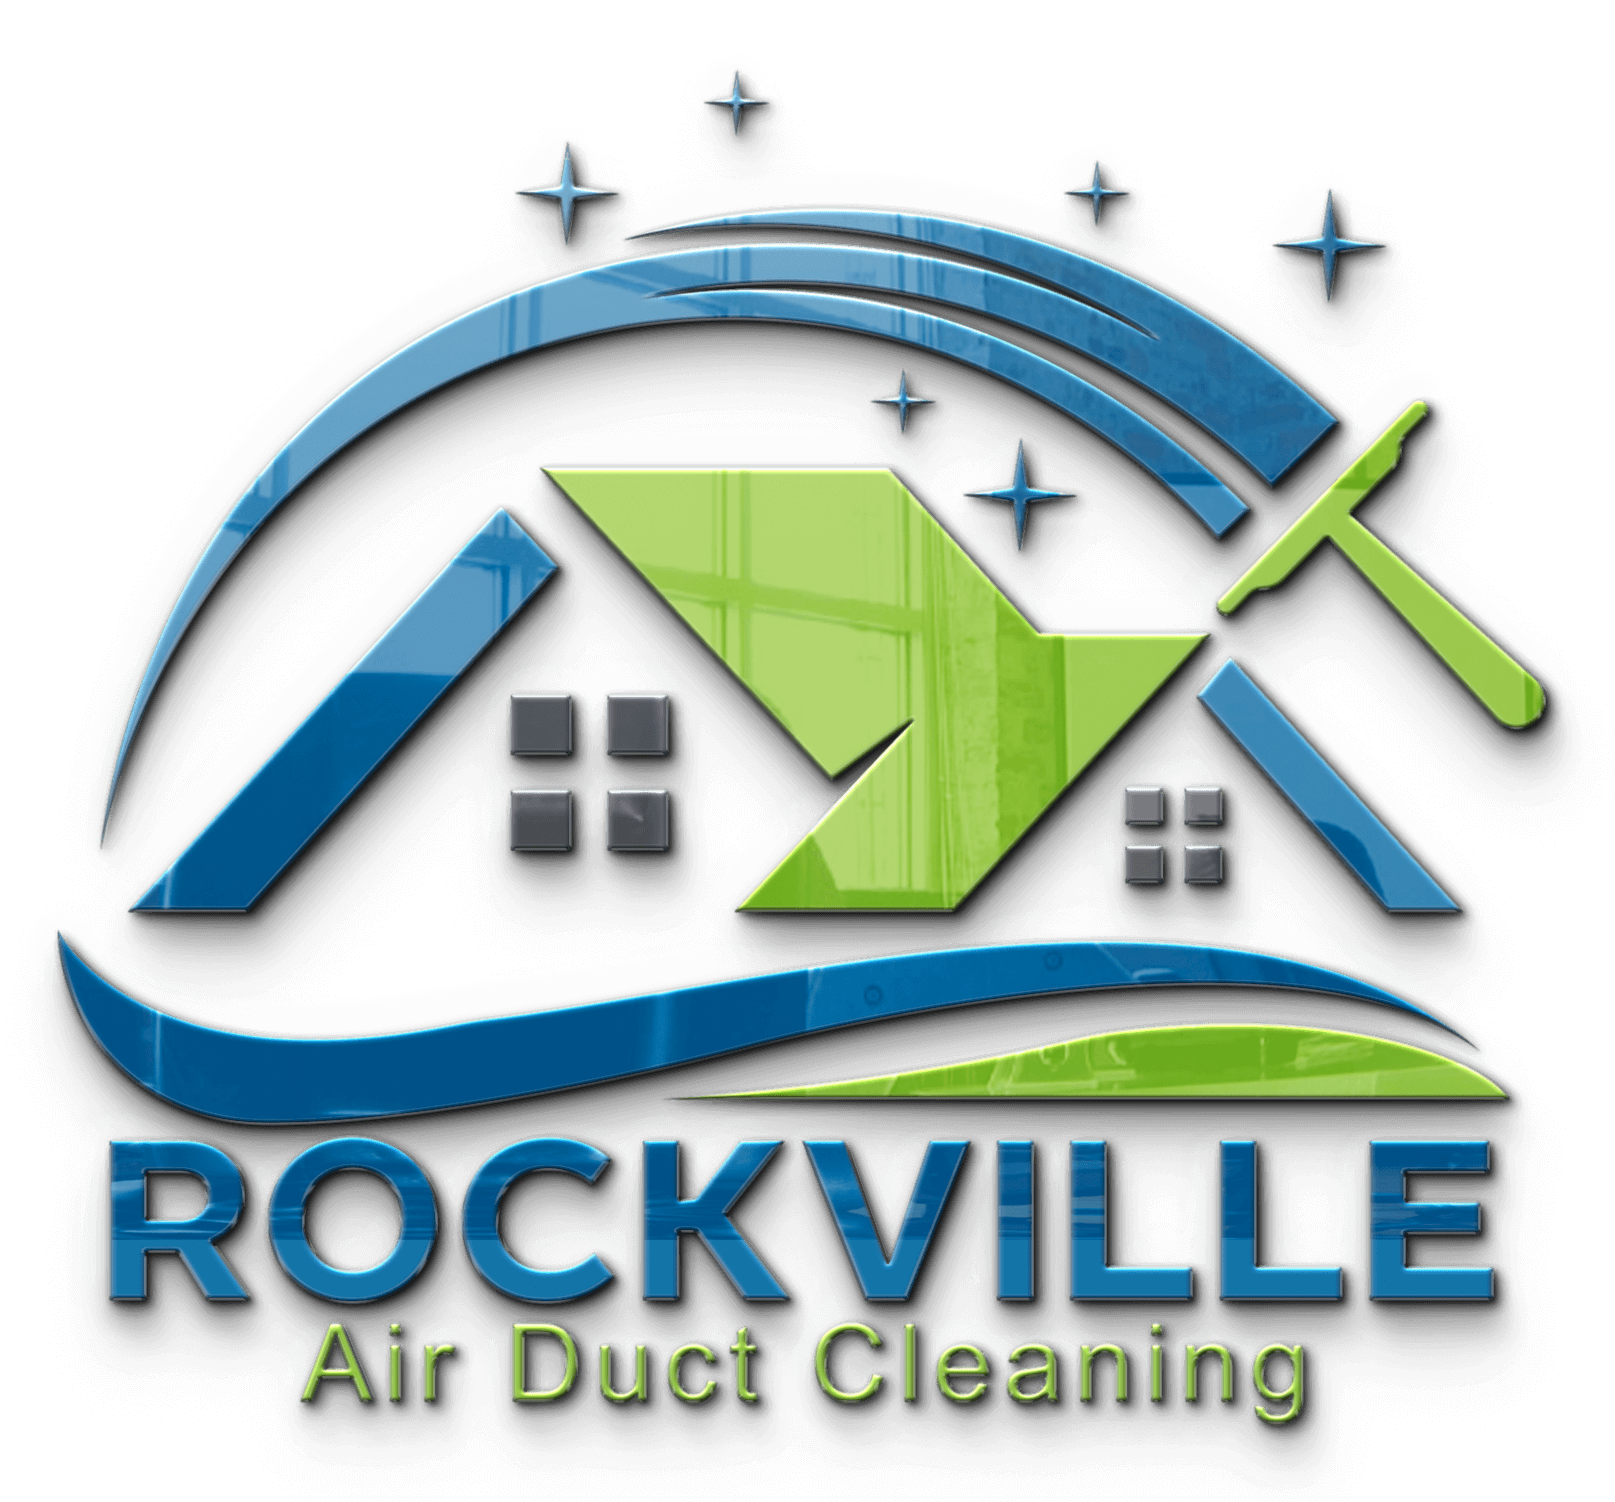 Rockville Air Duct Cleaning Logo